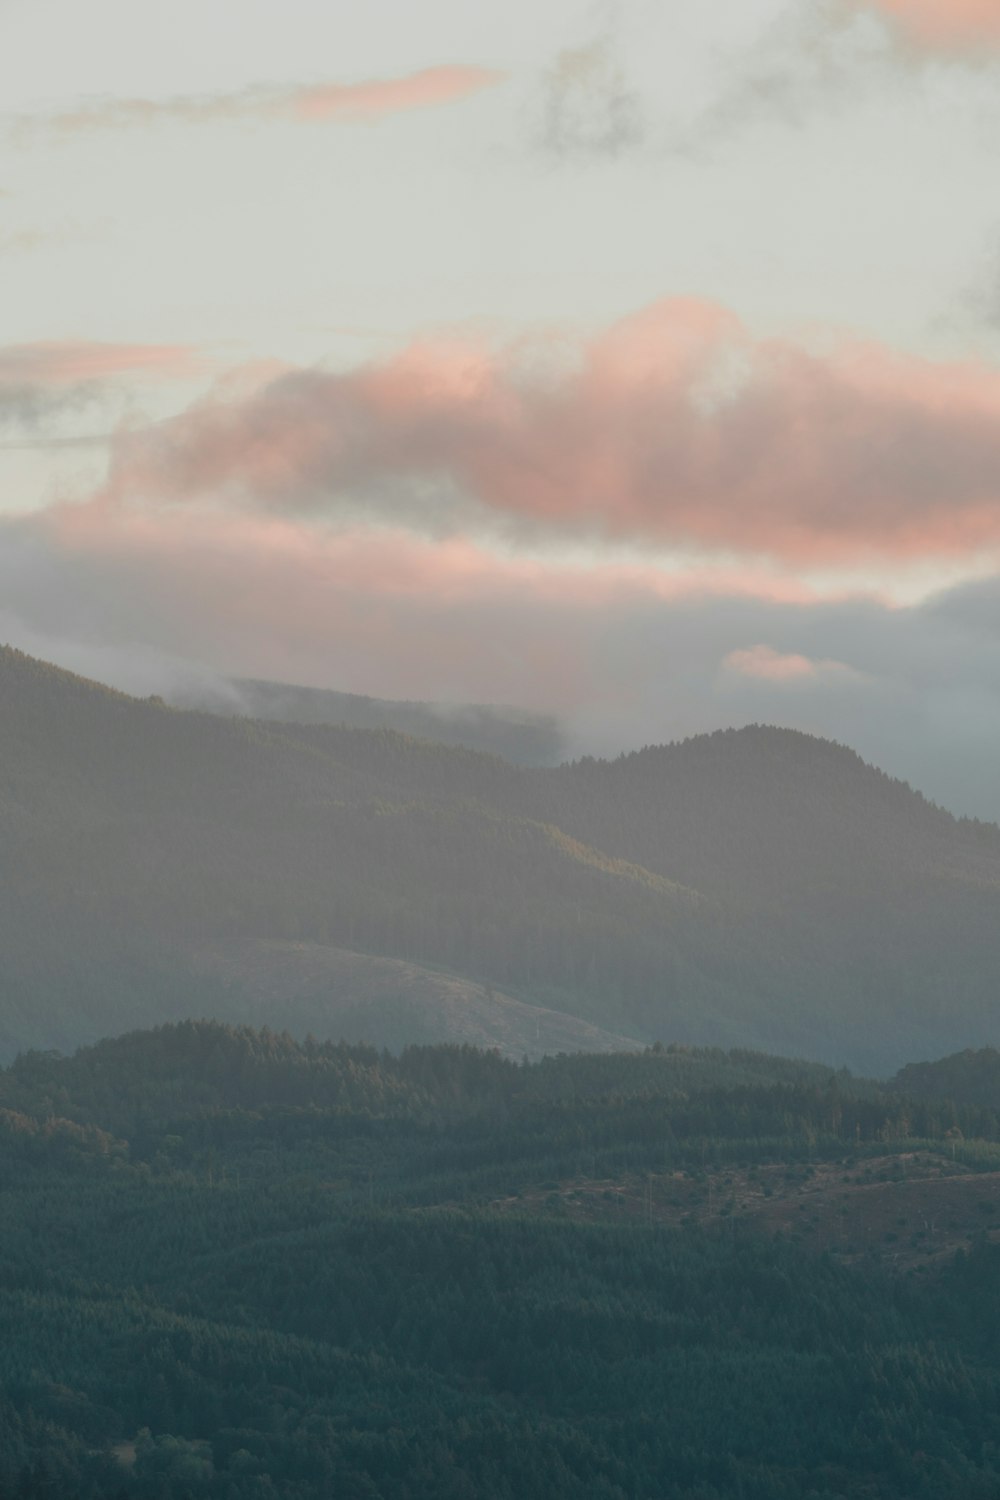 a view of a mountain range with a pink cloud in the sky